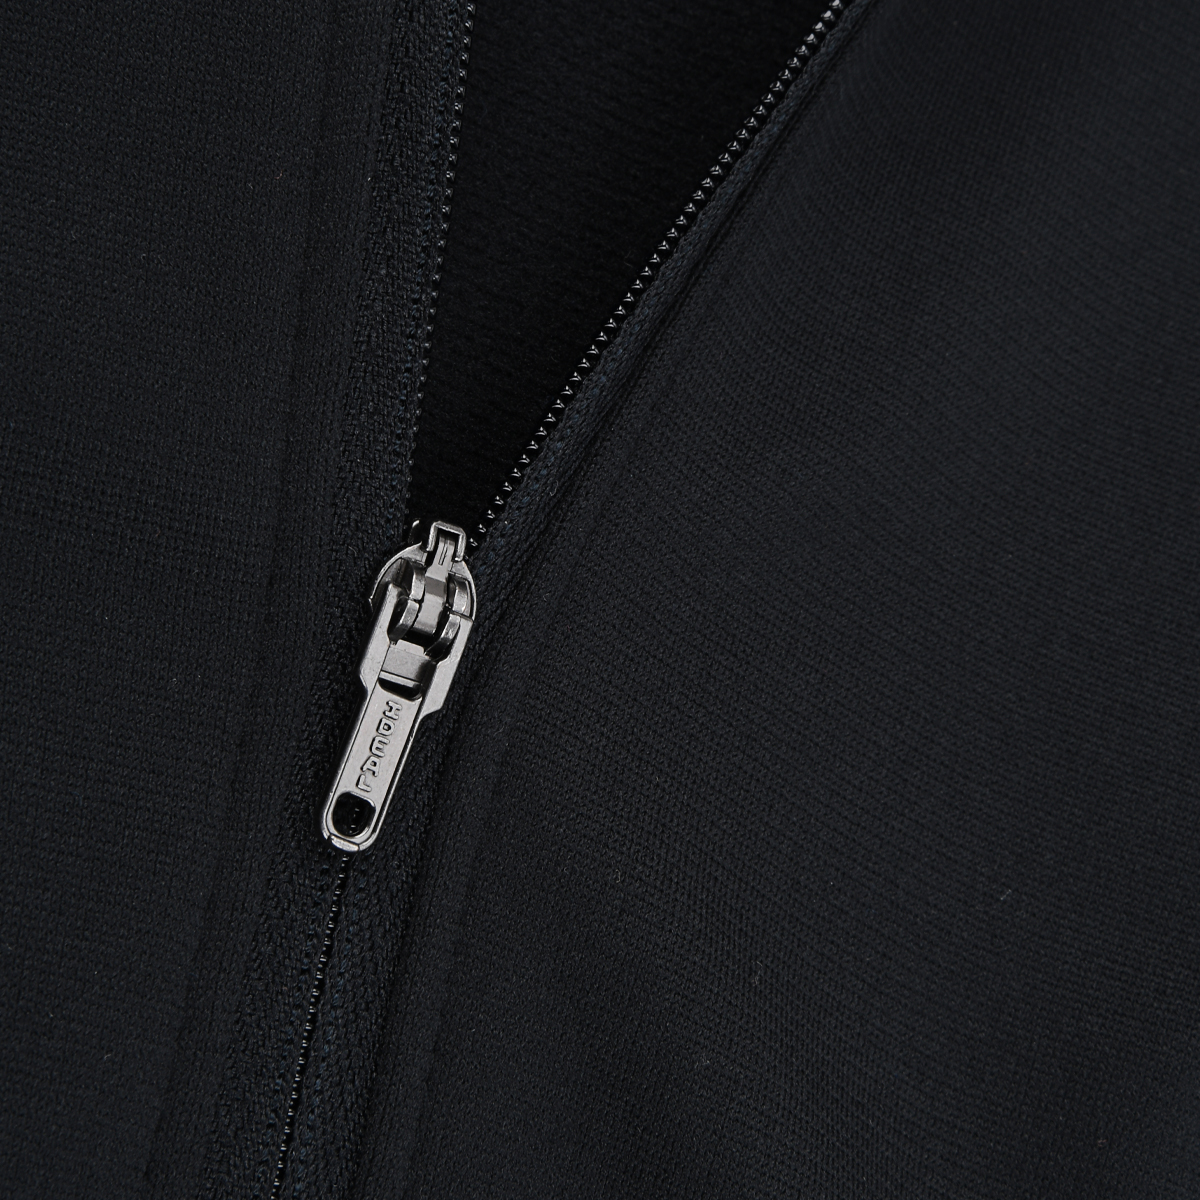 Buzo Under Armour Challenger Midlayer,  image number null